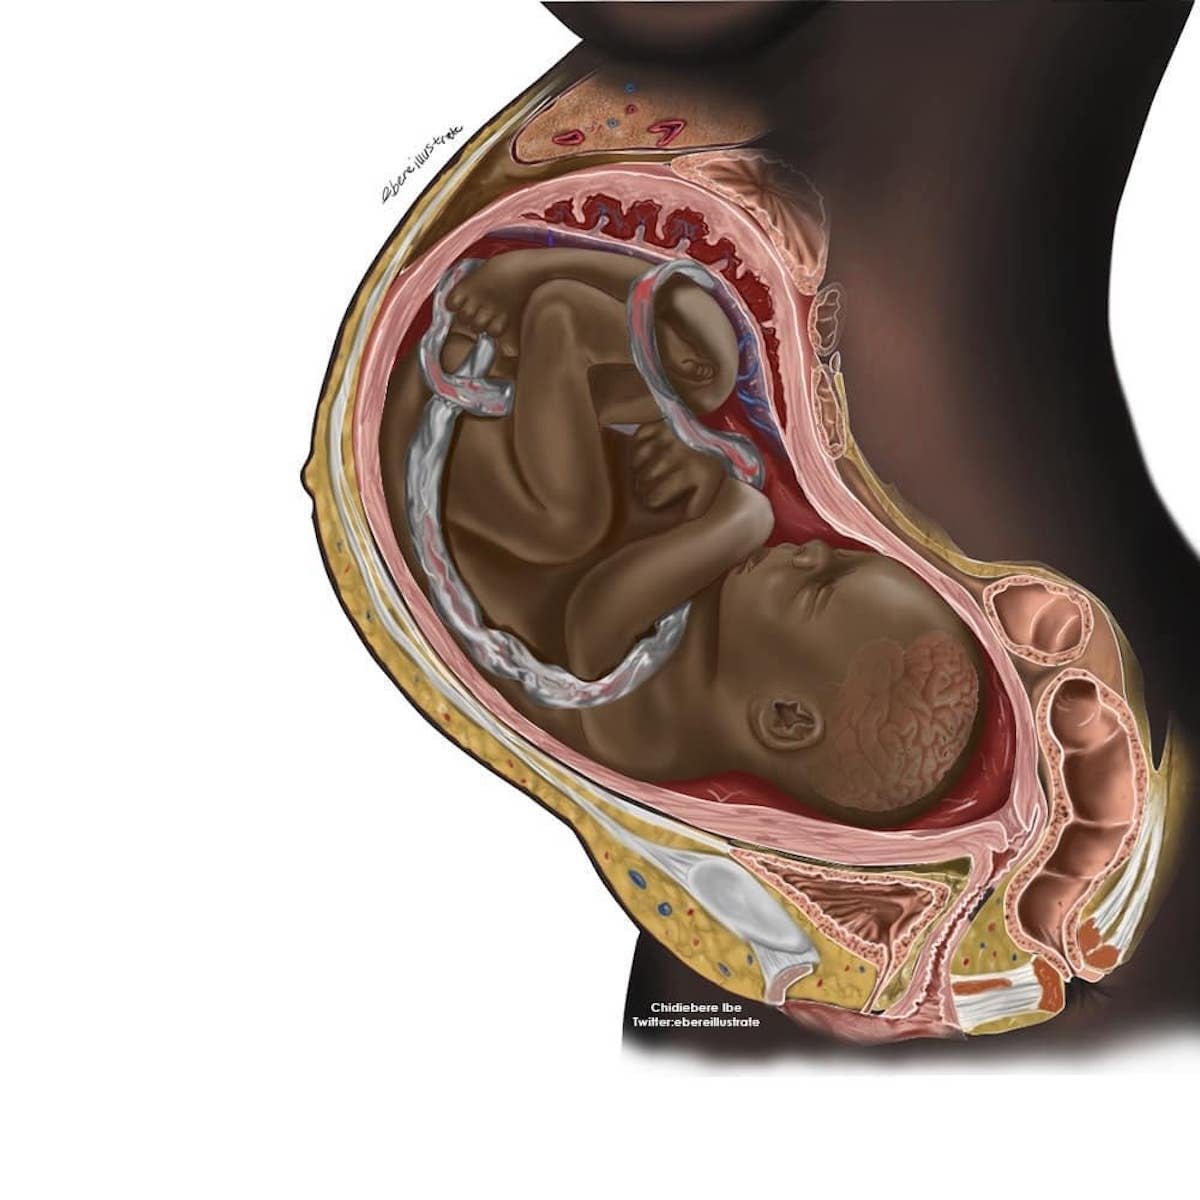 Black medical illustration of pregnancy fuels viral conversation about equity in healthcare